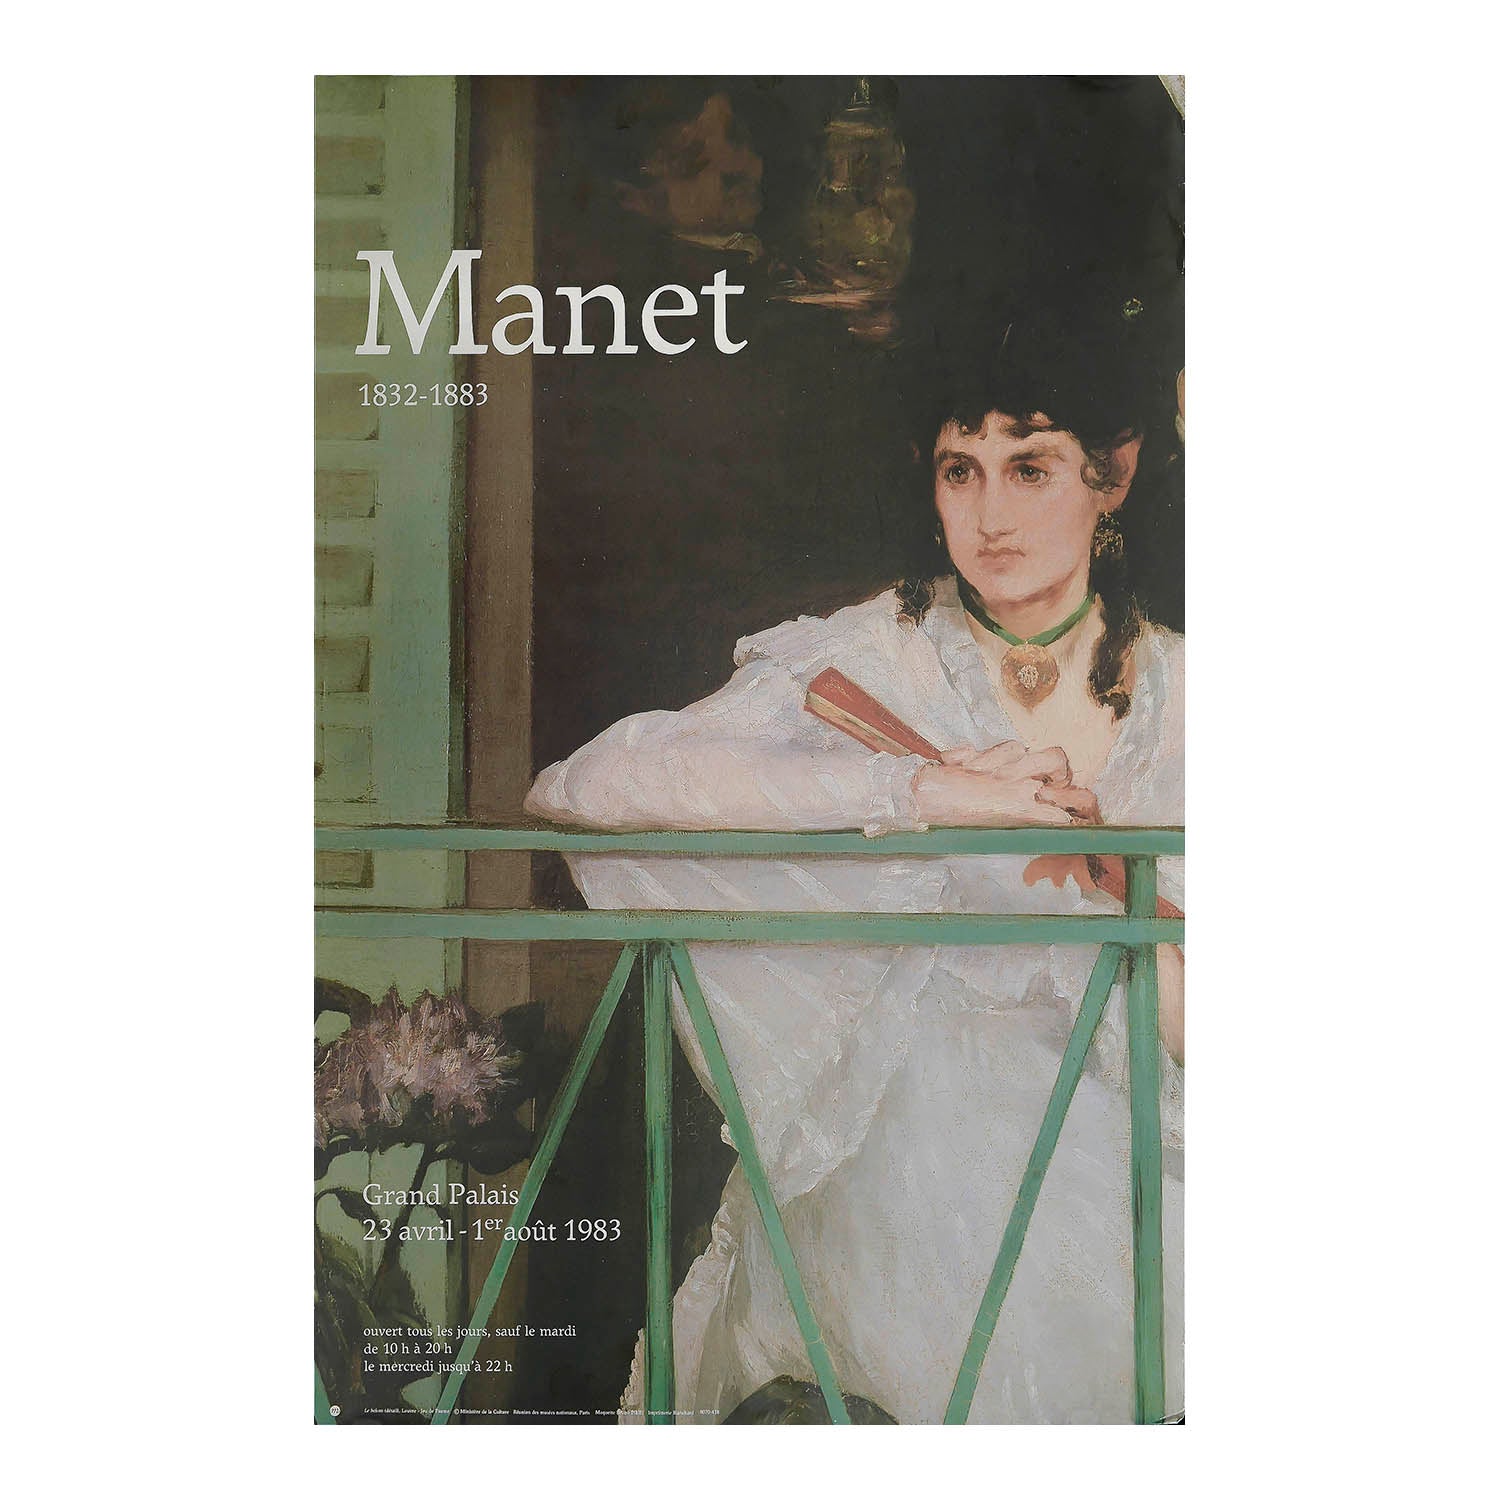 Original art exhibition poster, Manet 1832-1883, held at the Grand Palais, Paris, 1983. The design features a detail from The Balcony (French: Le balcon), 1868-69, by the French painter Édouard Manet. 